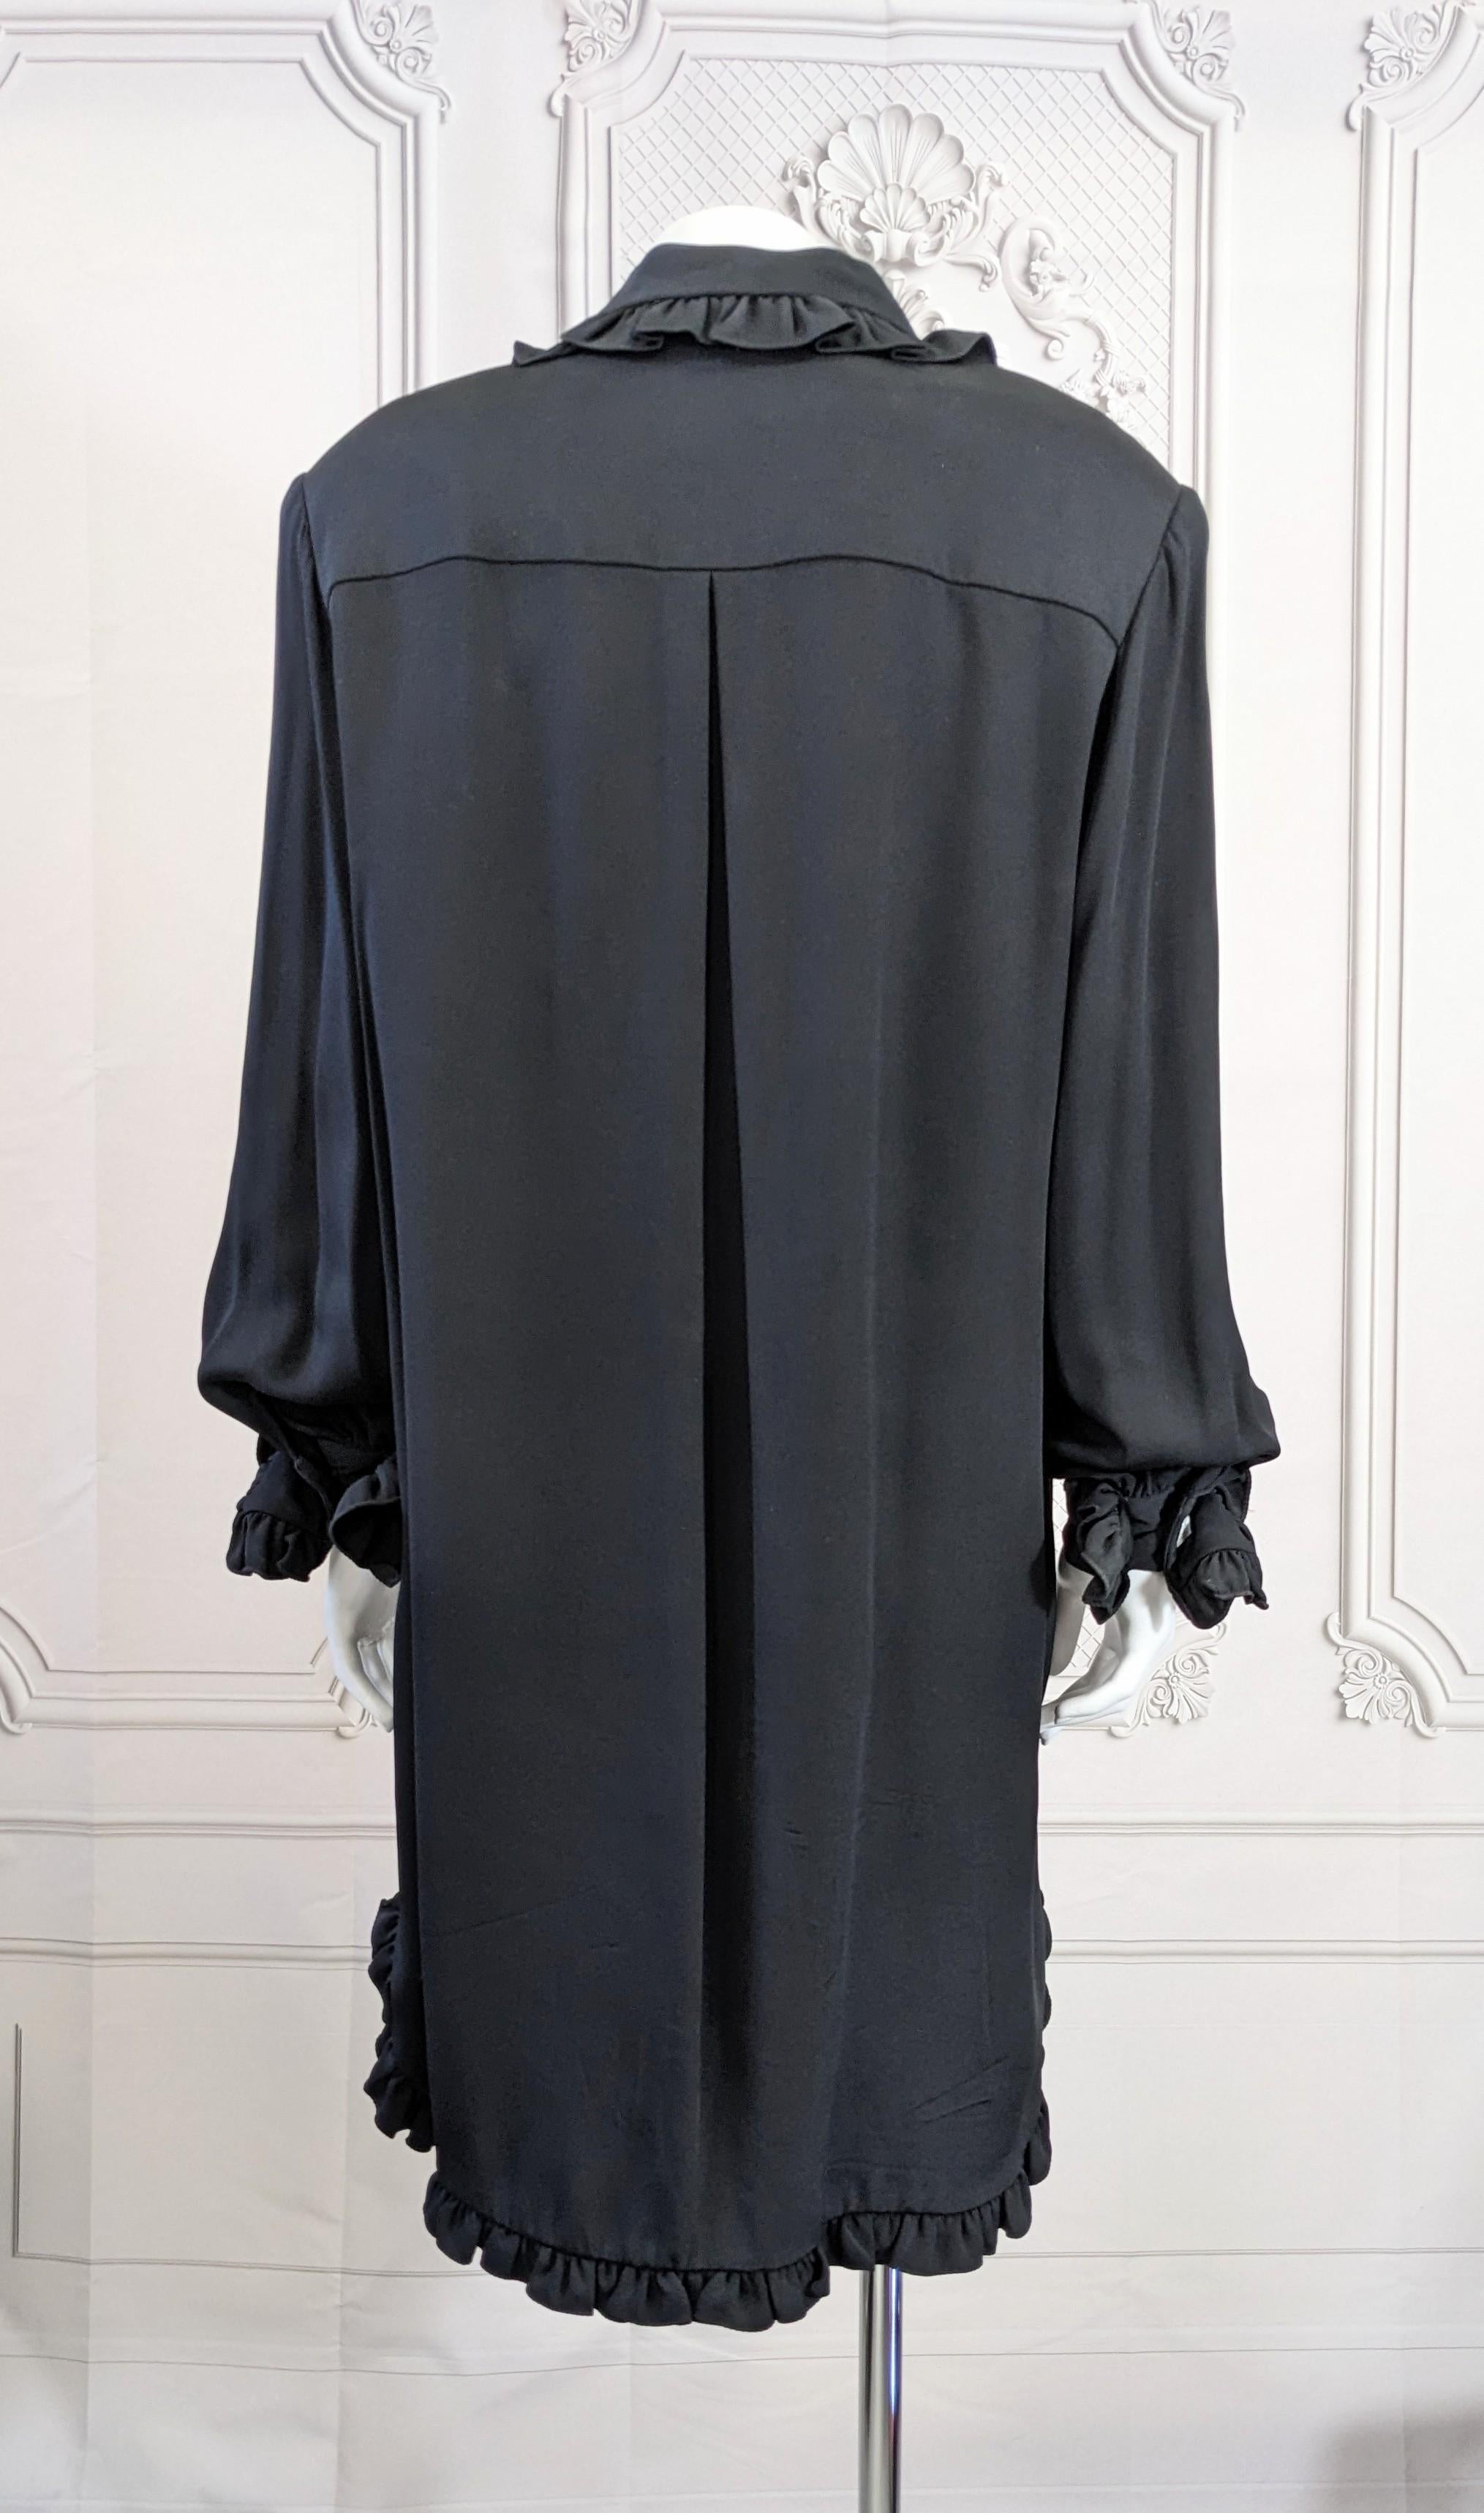 Bill Blass Ruffle Trimmed Shirt Dress In Good Condition For Sale In New York, NY